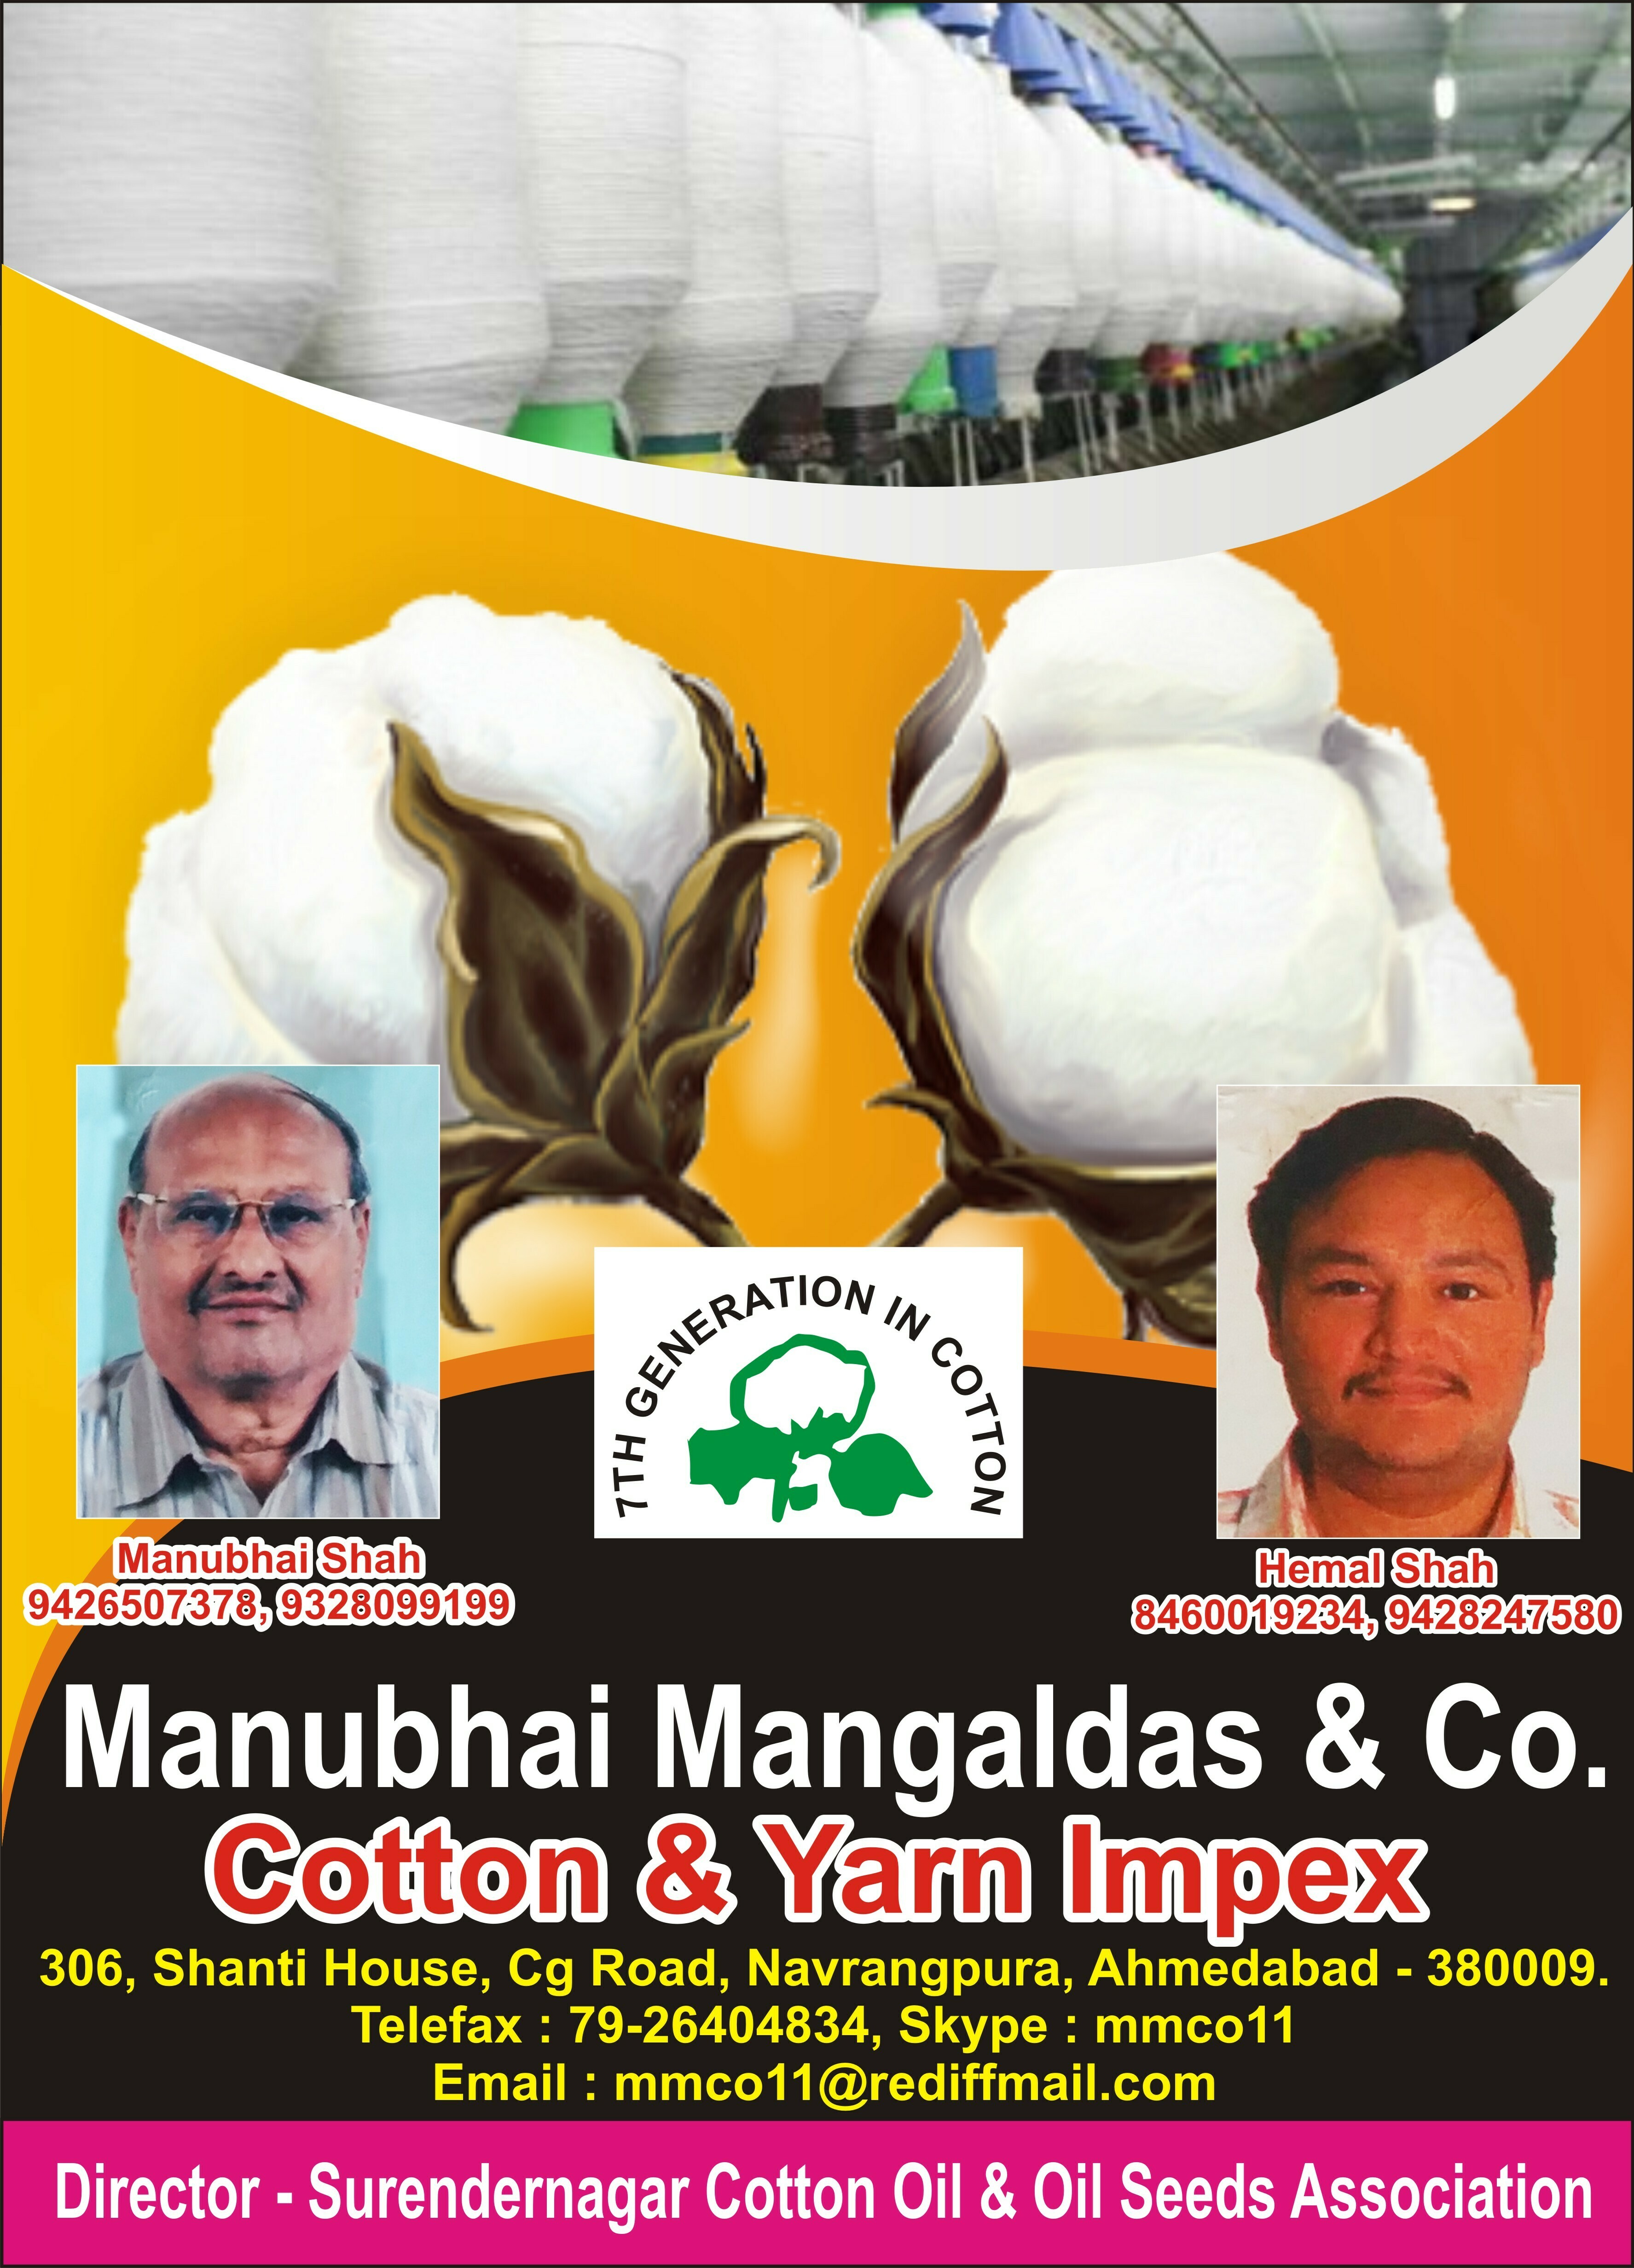 Manubhai Mangaldas and co. Cotton and yarn impex